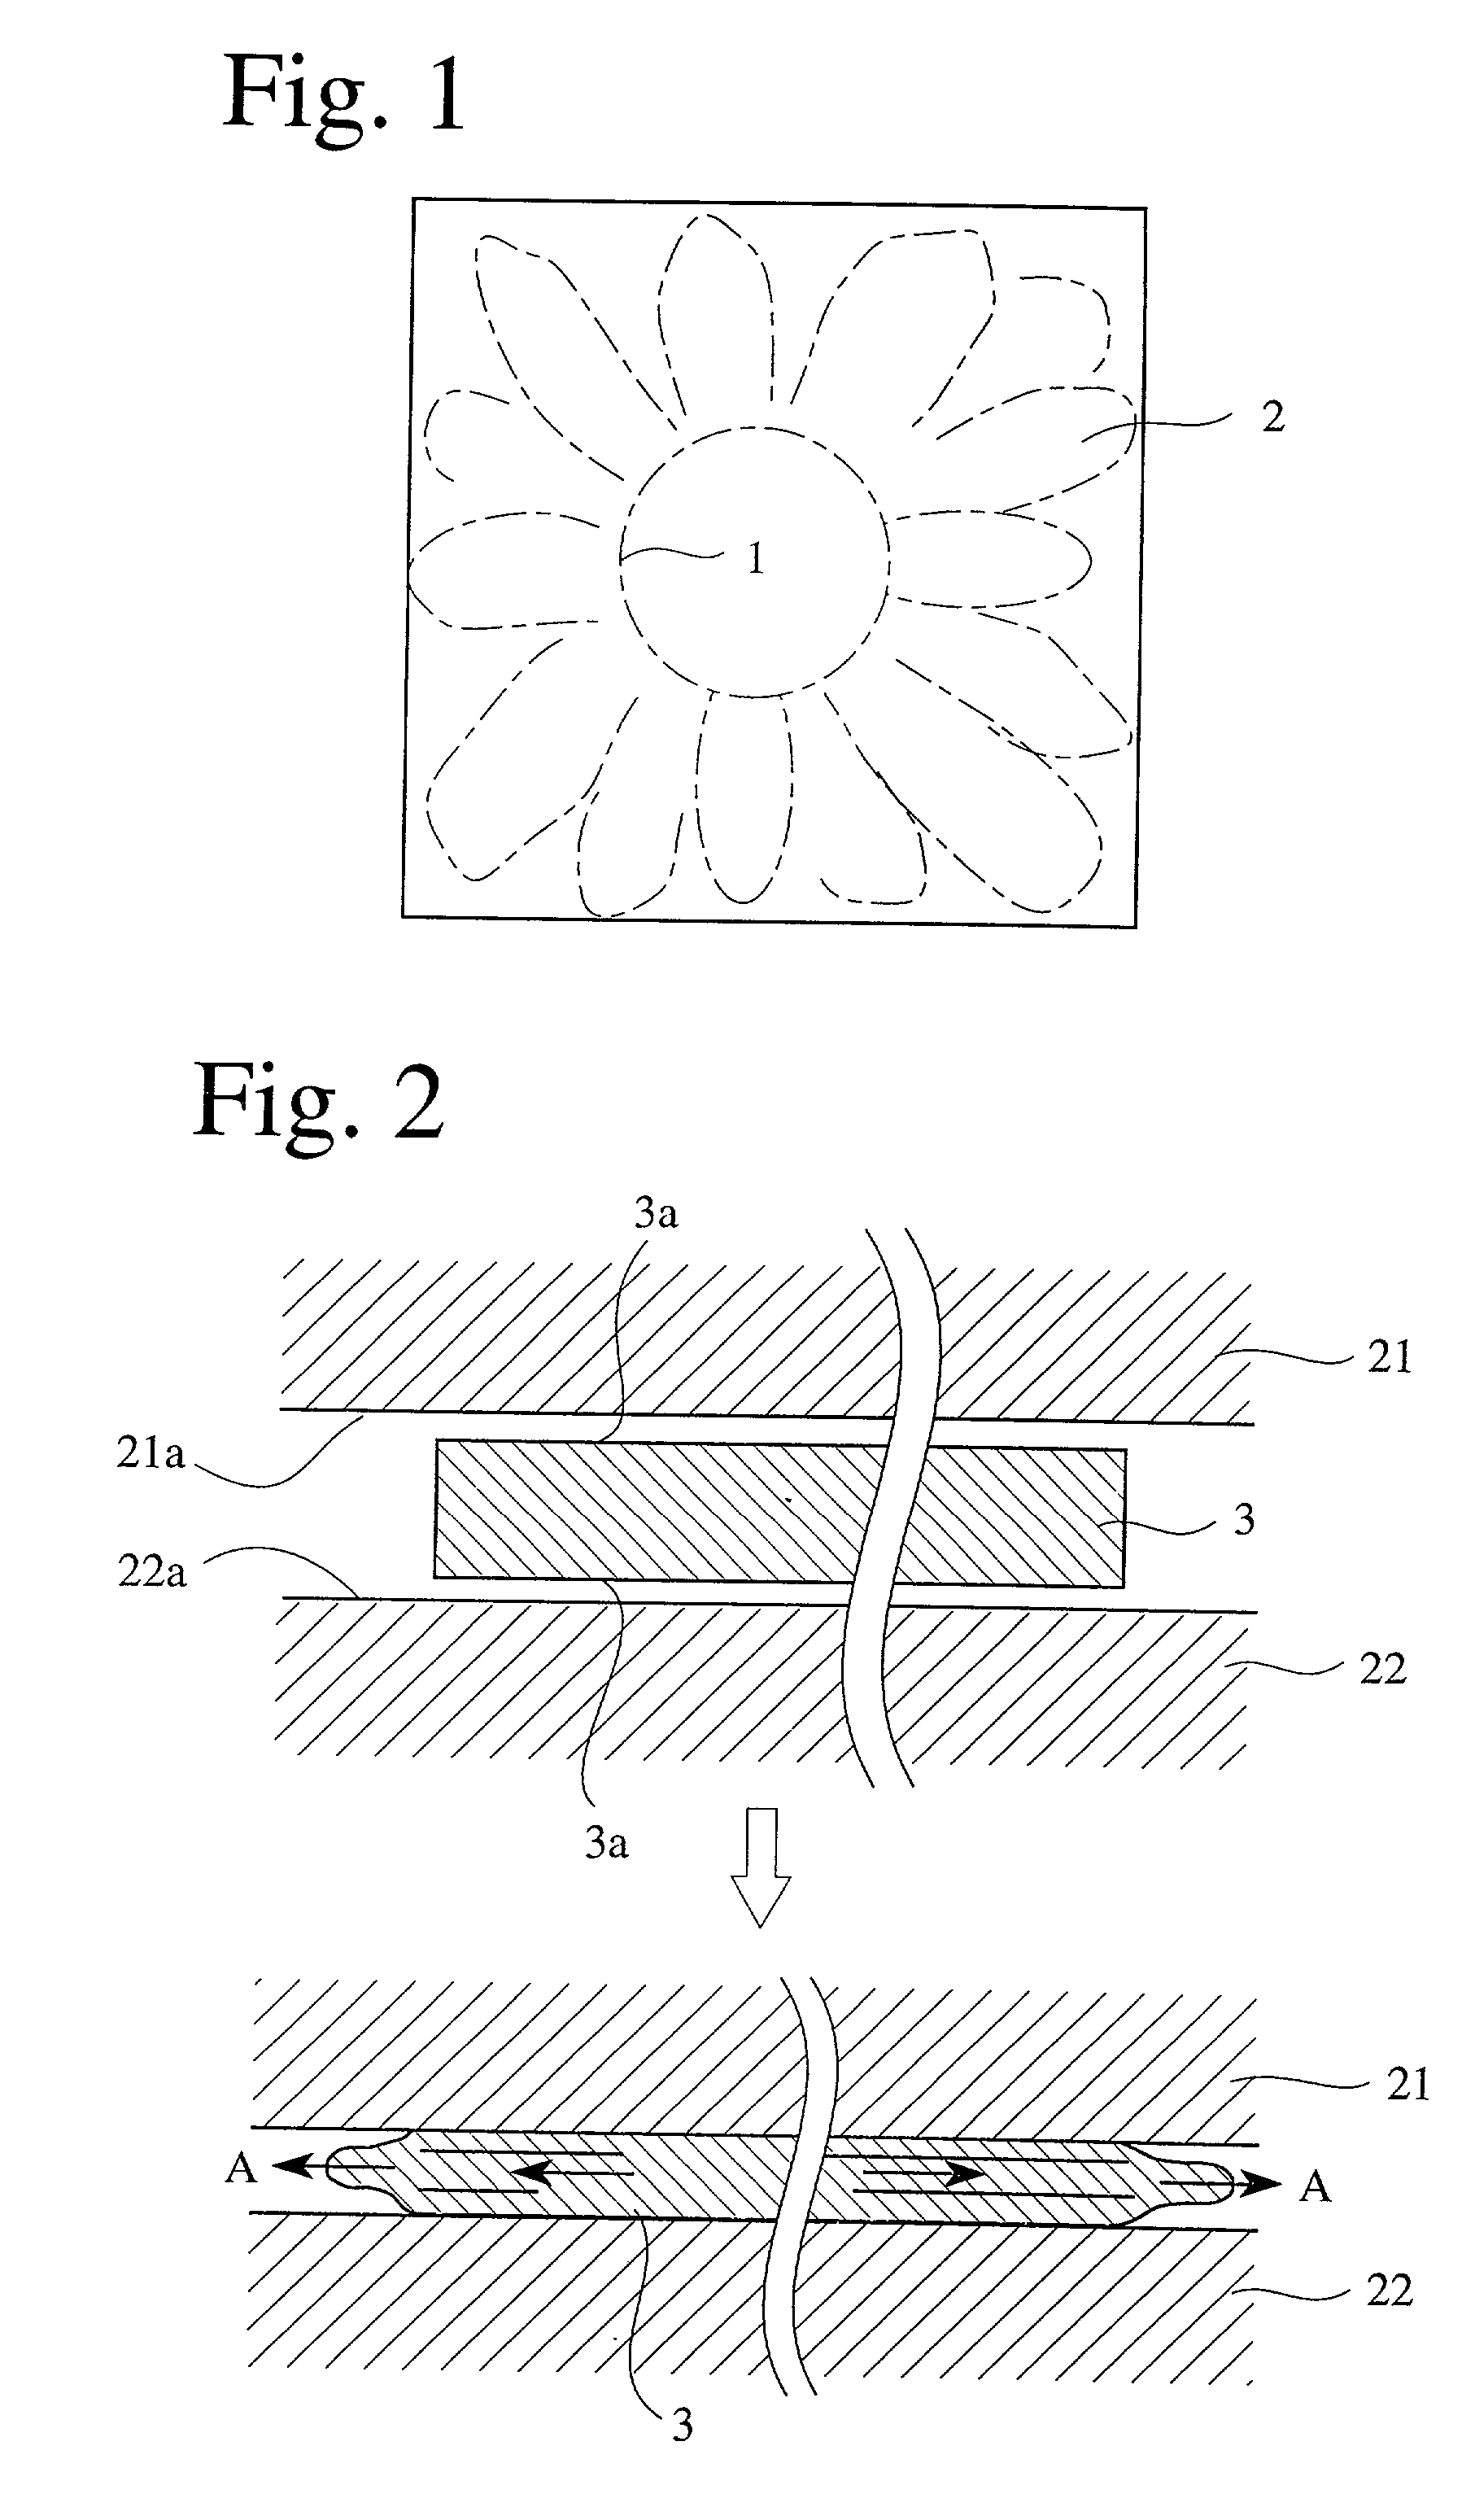 Thin, forged magnesium alloy casing and method for producing same